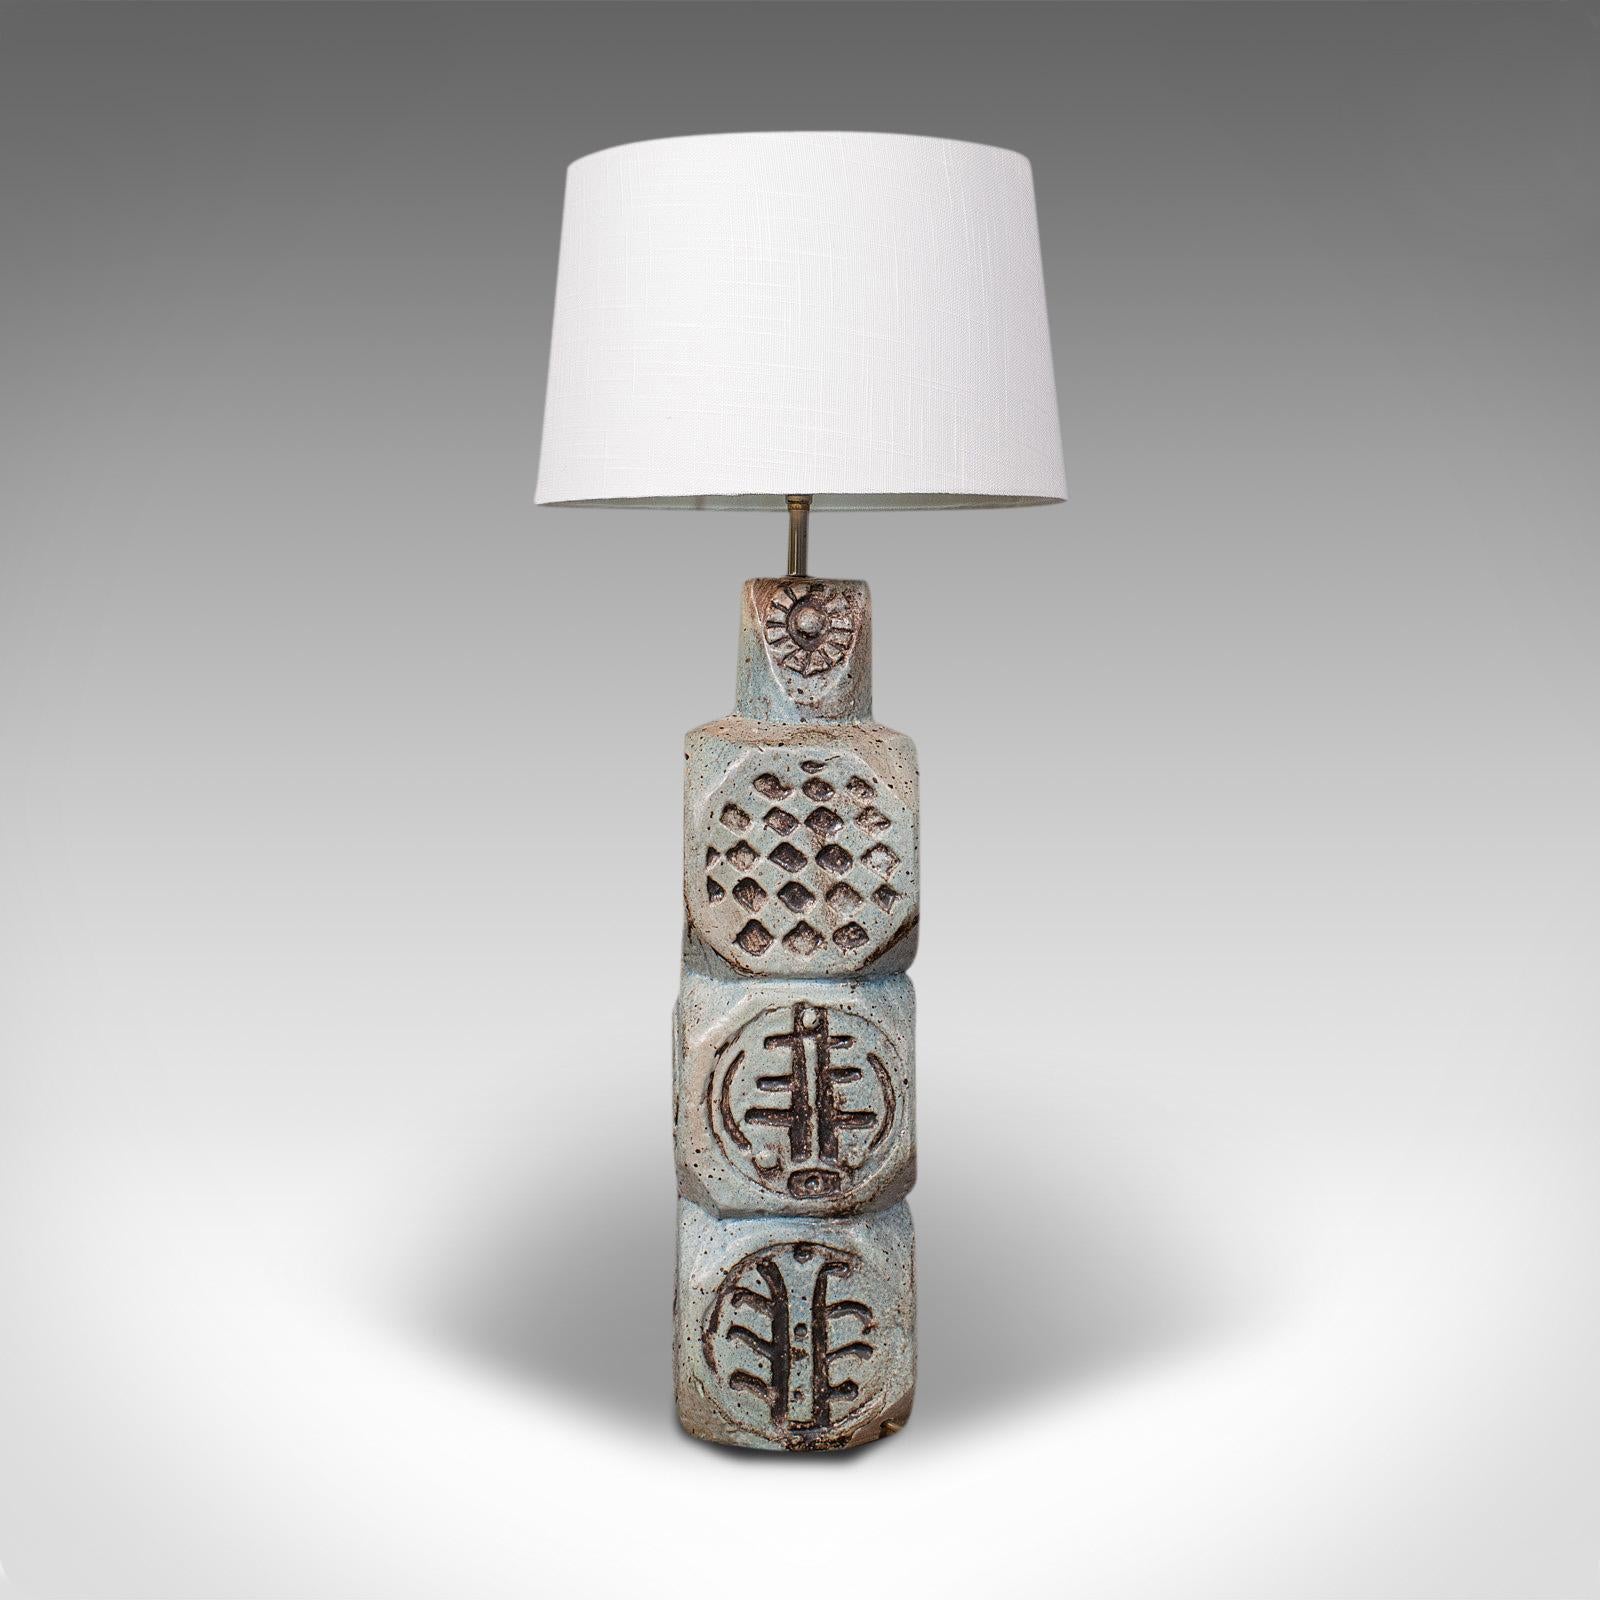 Vintage Table Lamp, English, Ceramic, Side Light, After Troika, 20th Century In Good Condition For Sale In Hele, Devon, GB